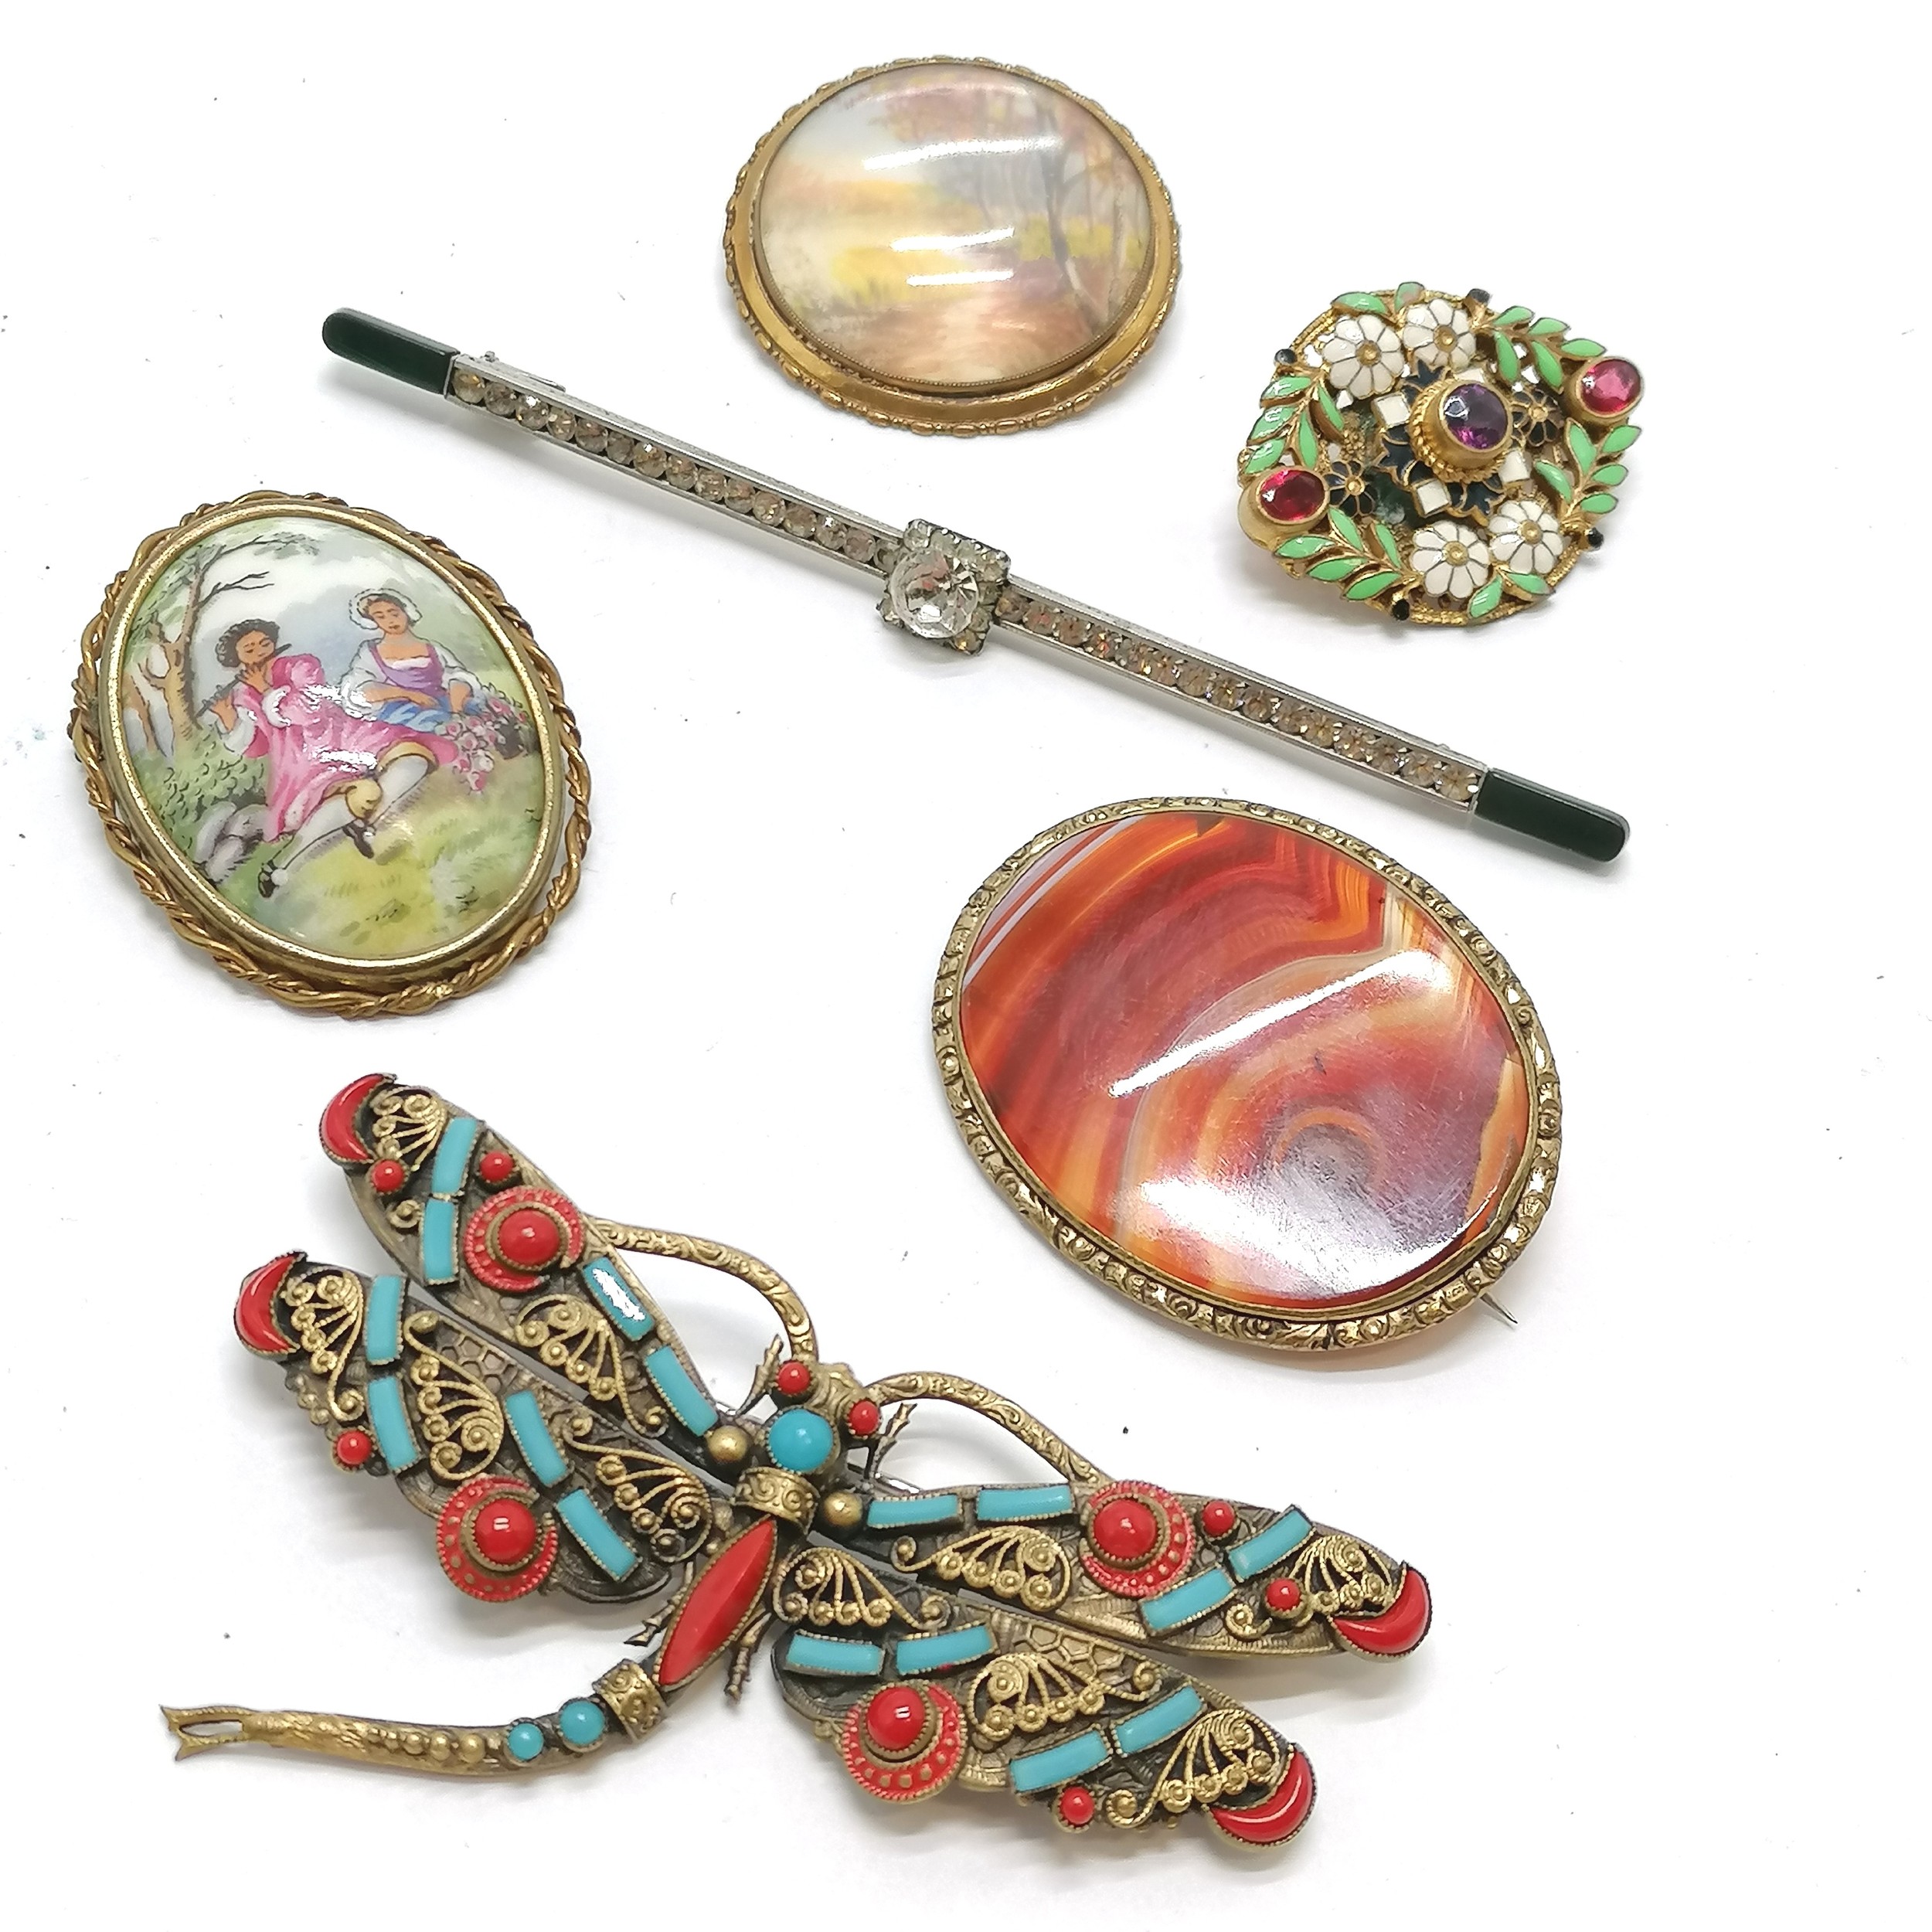 6 x vintage brooches inc agate, TLM hand painted, dragonfly (8cm wingspan), enamelled, Limoges etc